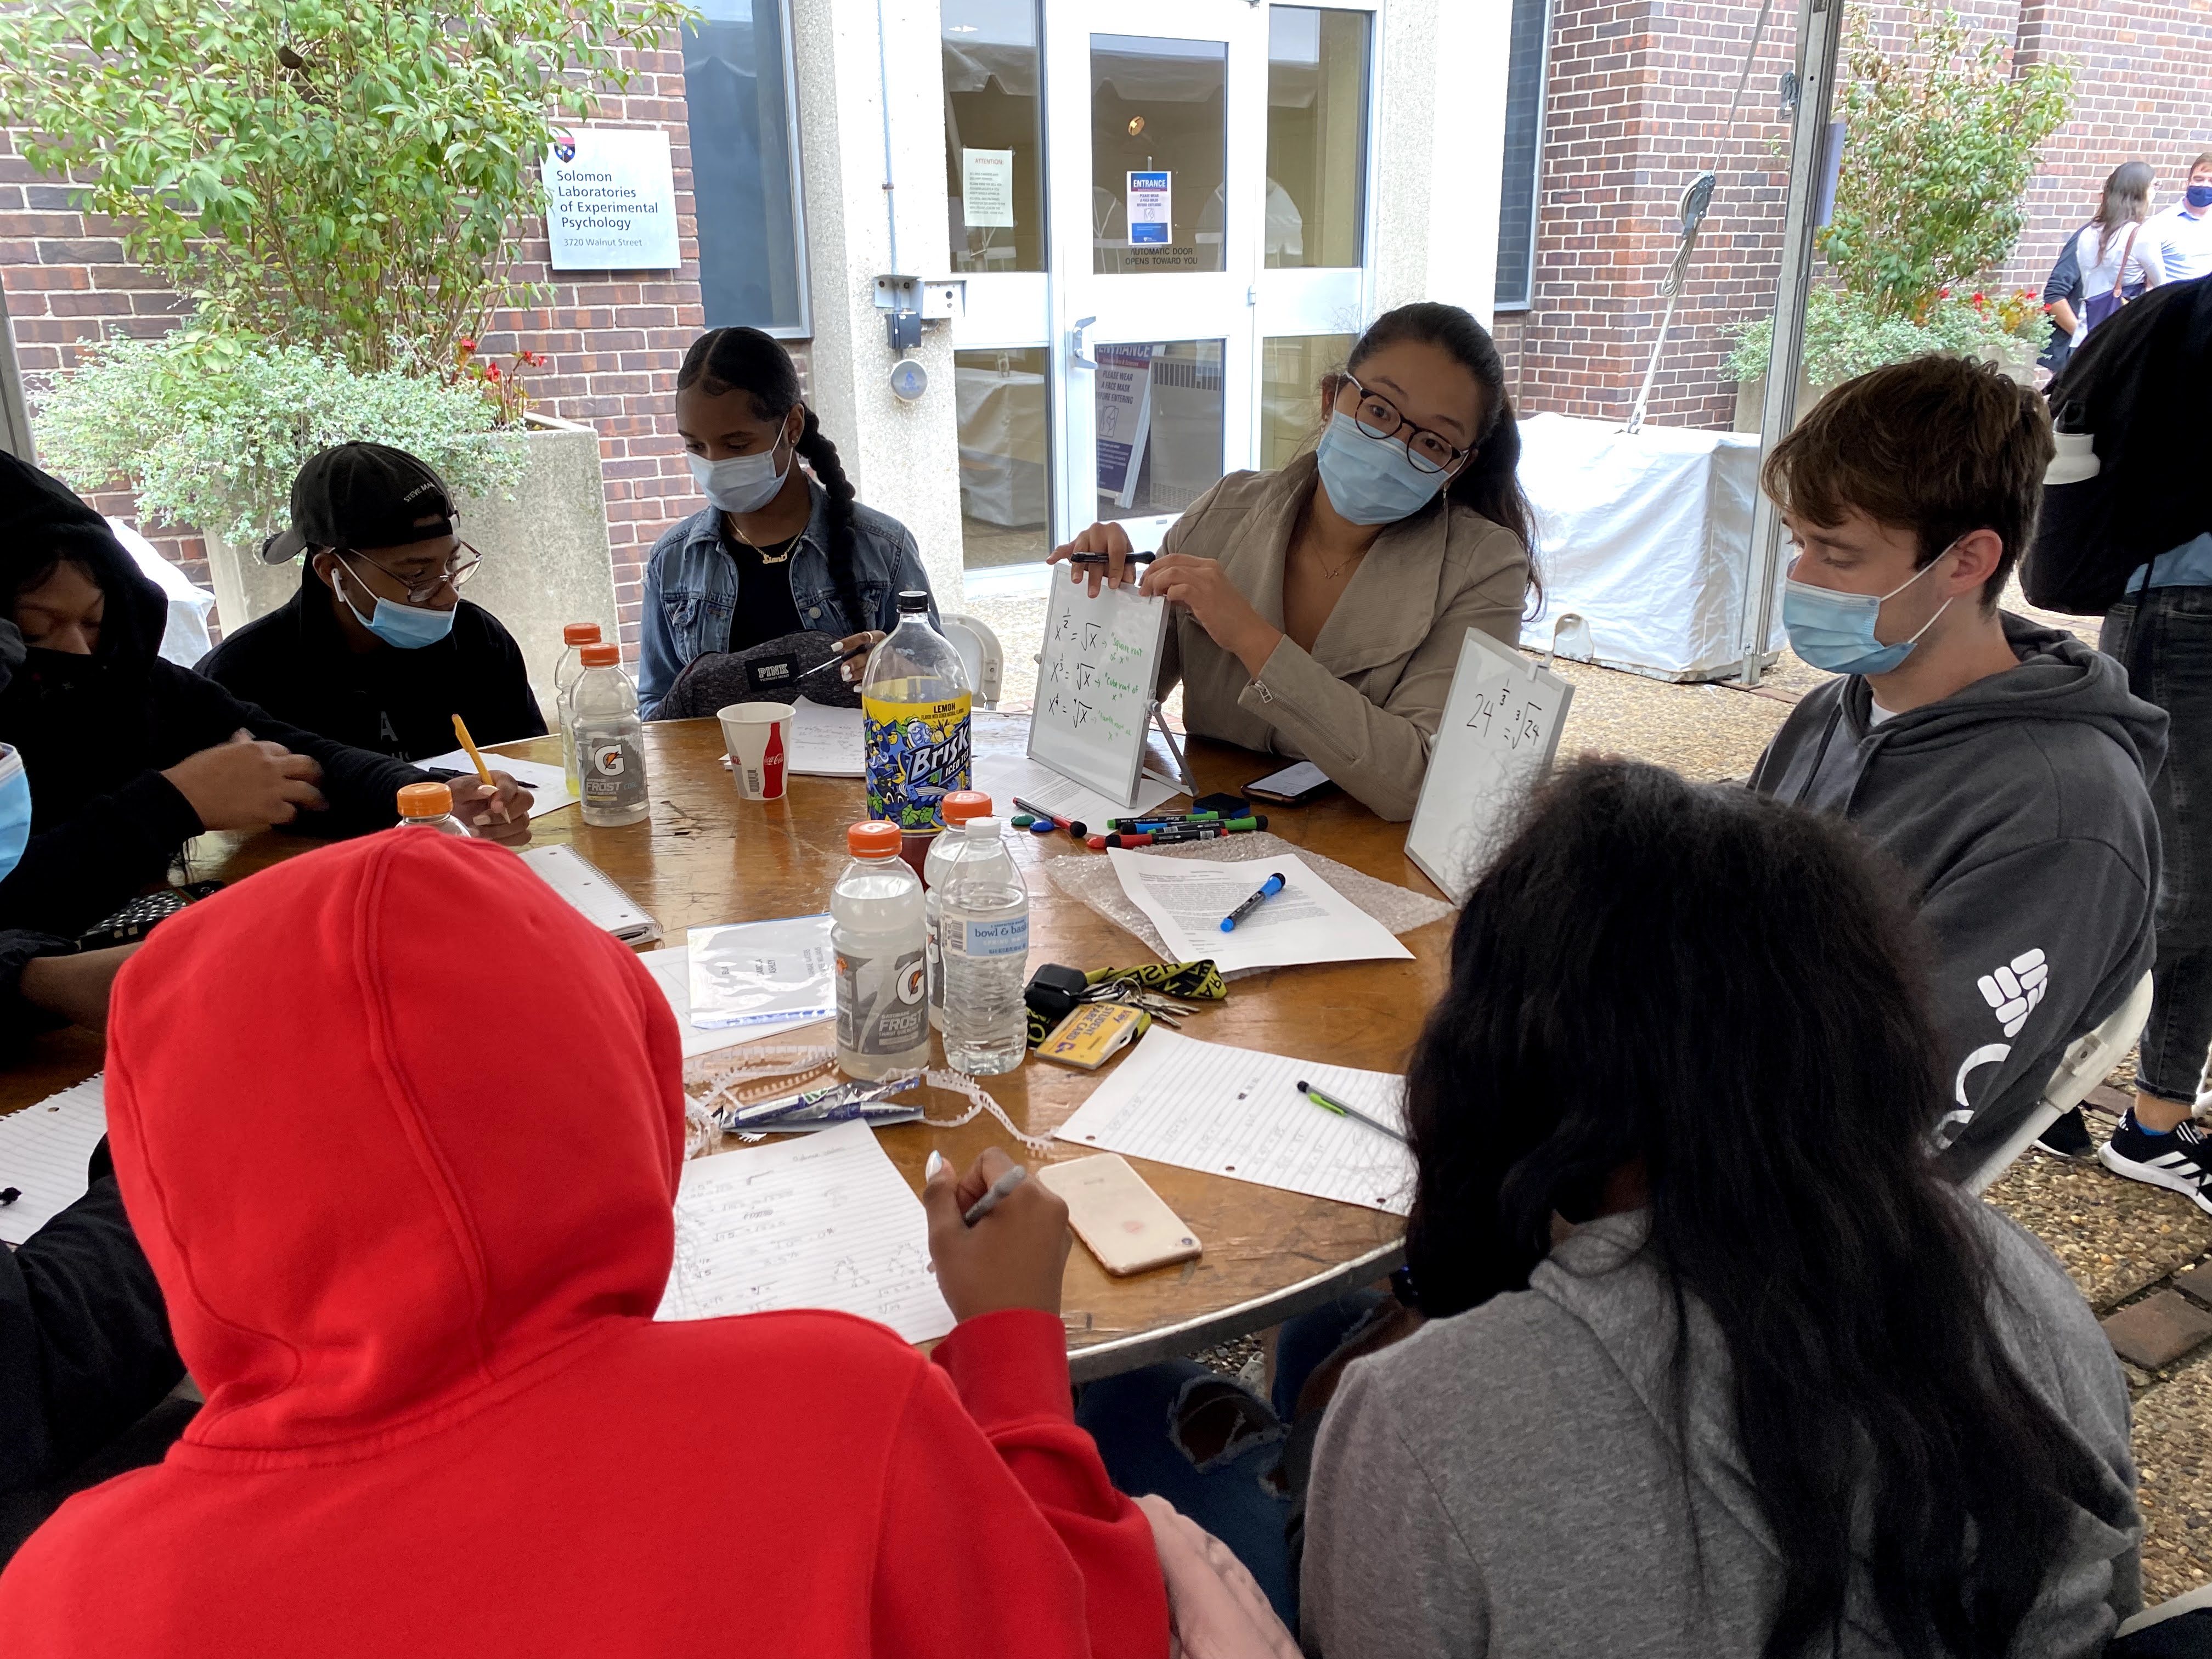 a group of students working at an outdoor tent on math equations